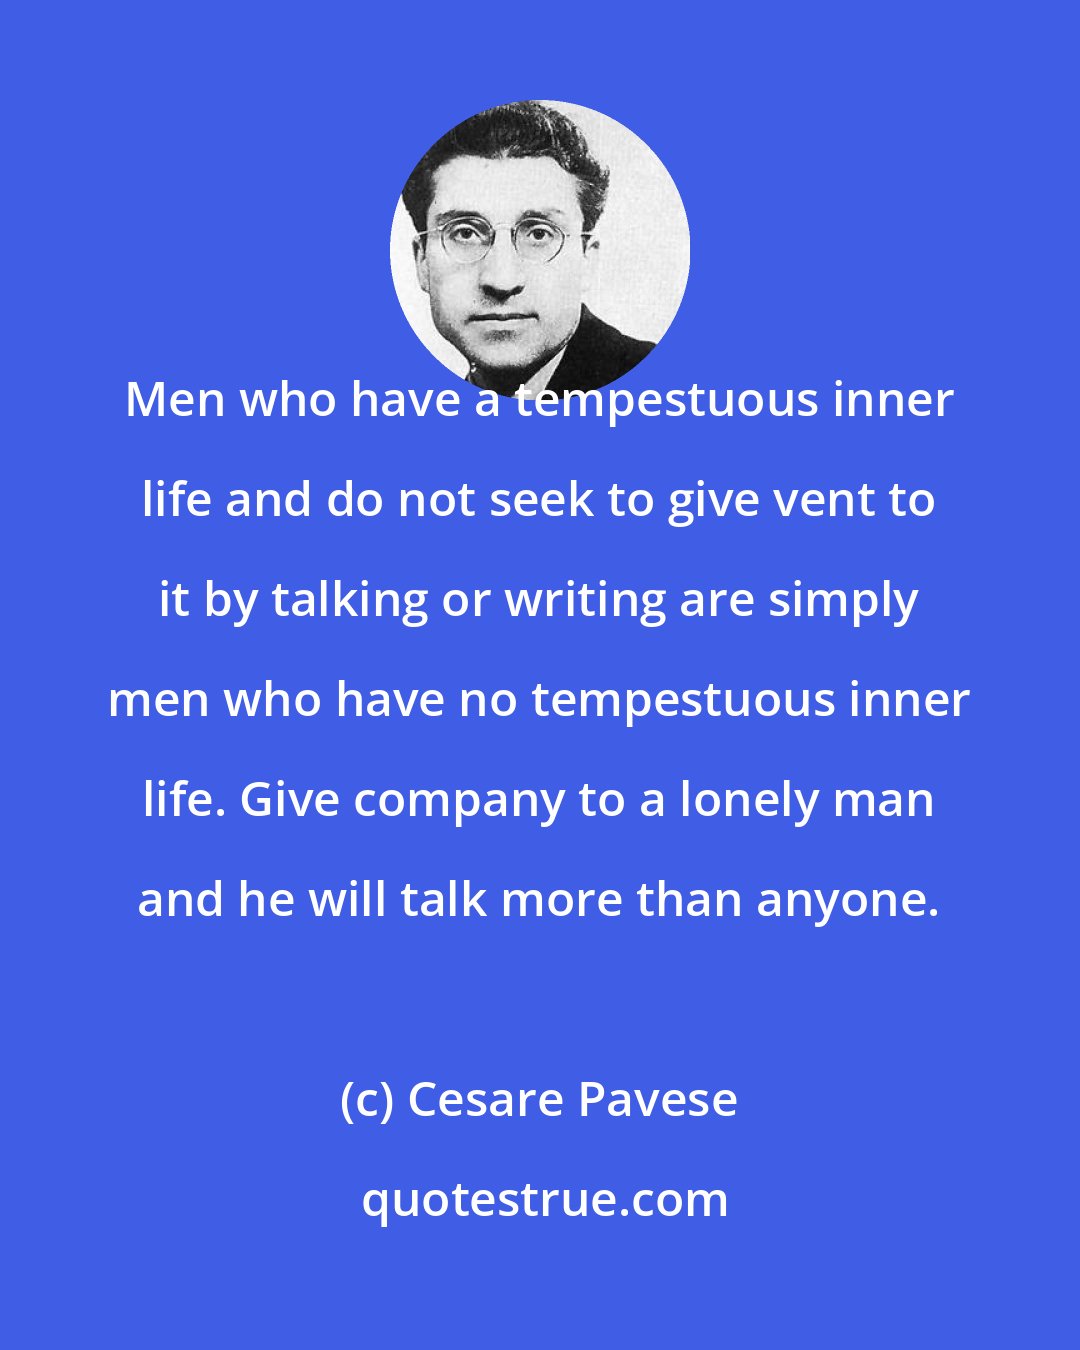 Cesare Pavese: Men who have a tempestuous inner life and do not seek to give vent to it by talking or writing are simply men who have no tempestuous inner life. Give company to a lonely man and he will talk more than anyone.